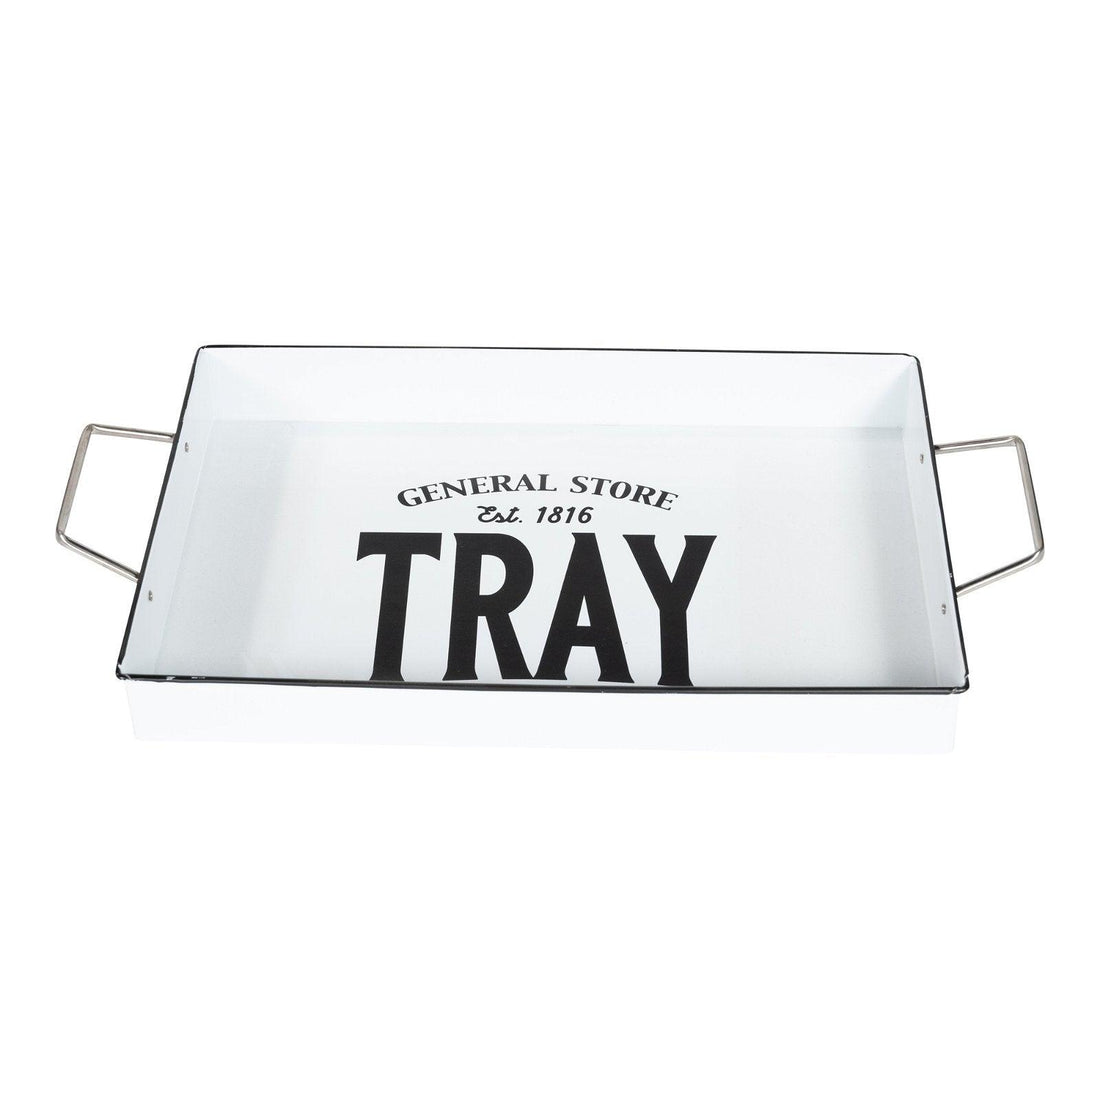 General Store Metal Serving Tray 51x27cm - £27.99 - Trays & Chopping Boards 